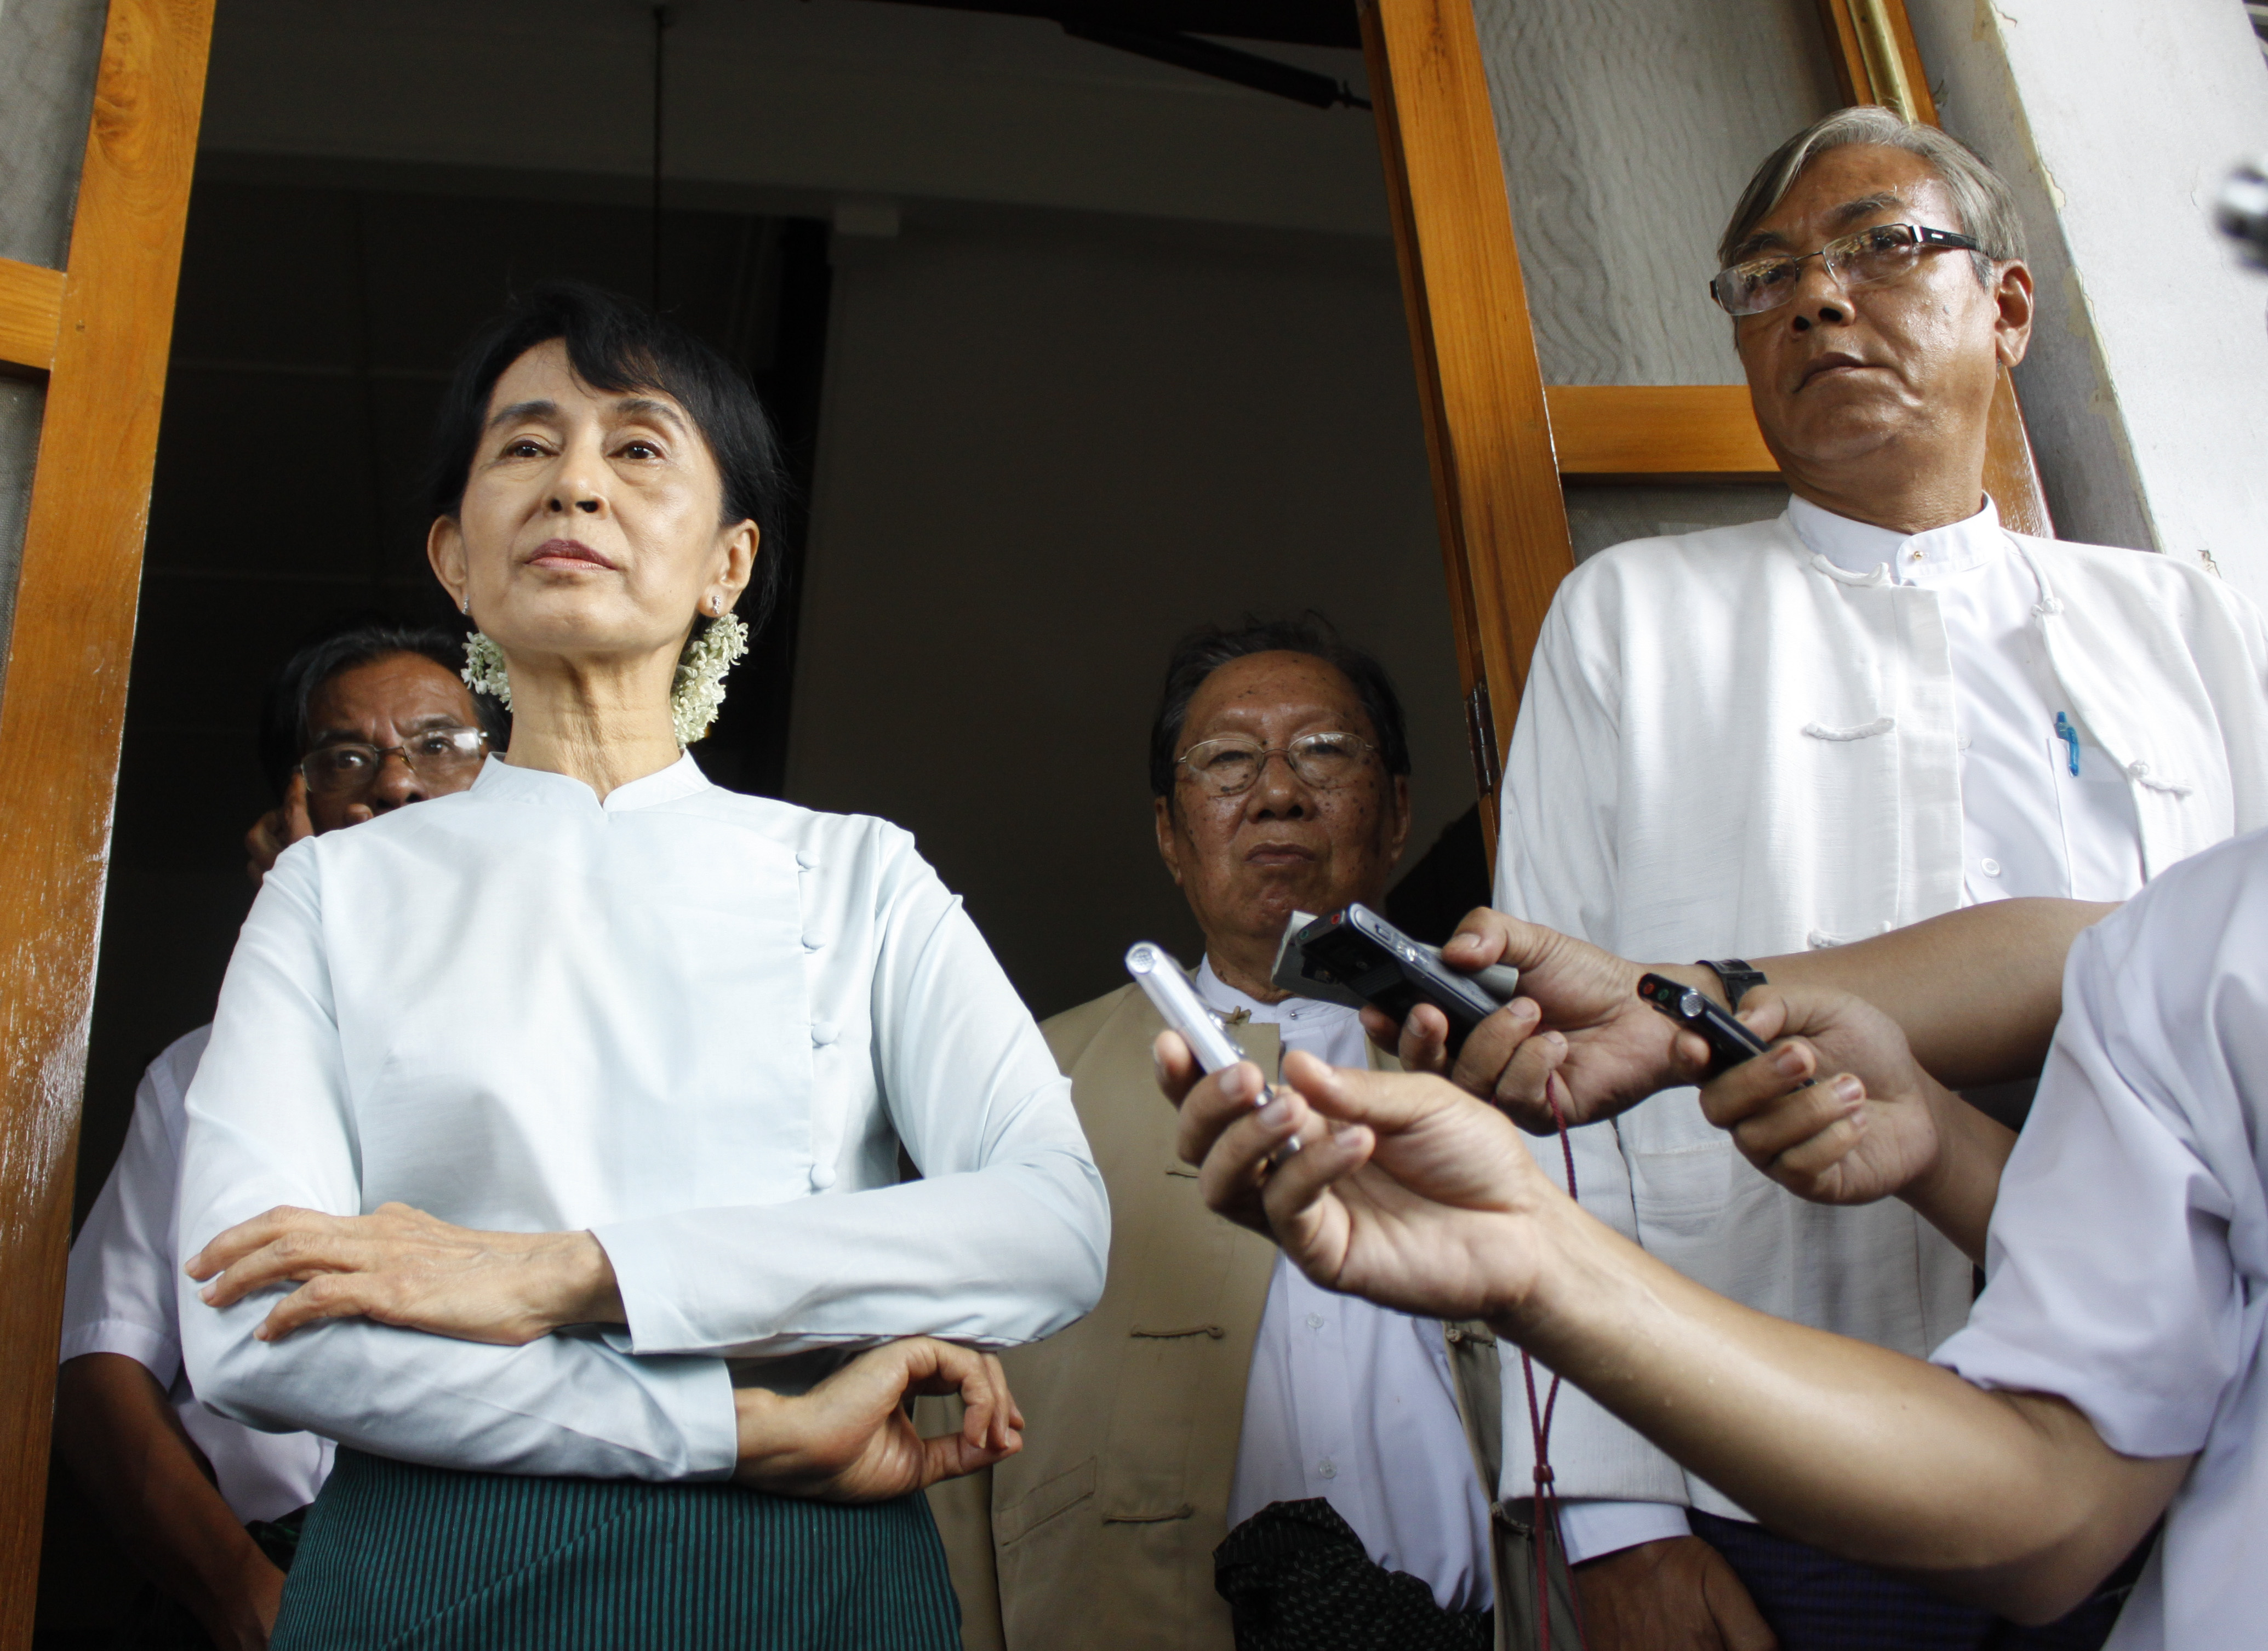 Presidential nominee Htin Kyaw (R), is seen standing next to Aung San Suu Kyi in this file photo from a press meeting at her residence in Rangoon, Burma, June 2, 2011. (Lynn Bo Bo—EPA)